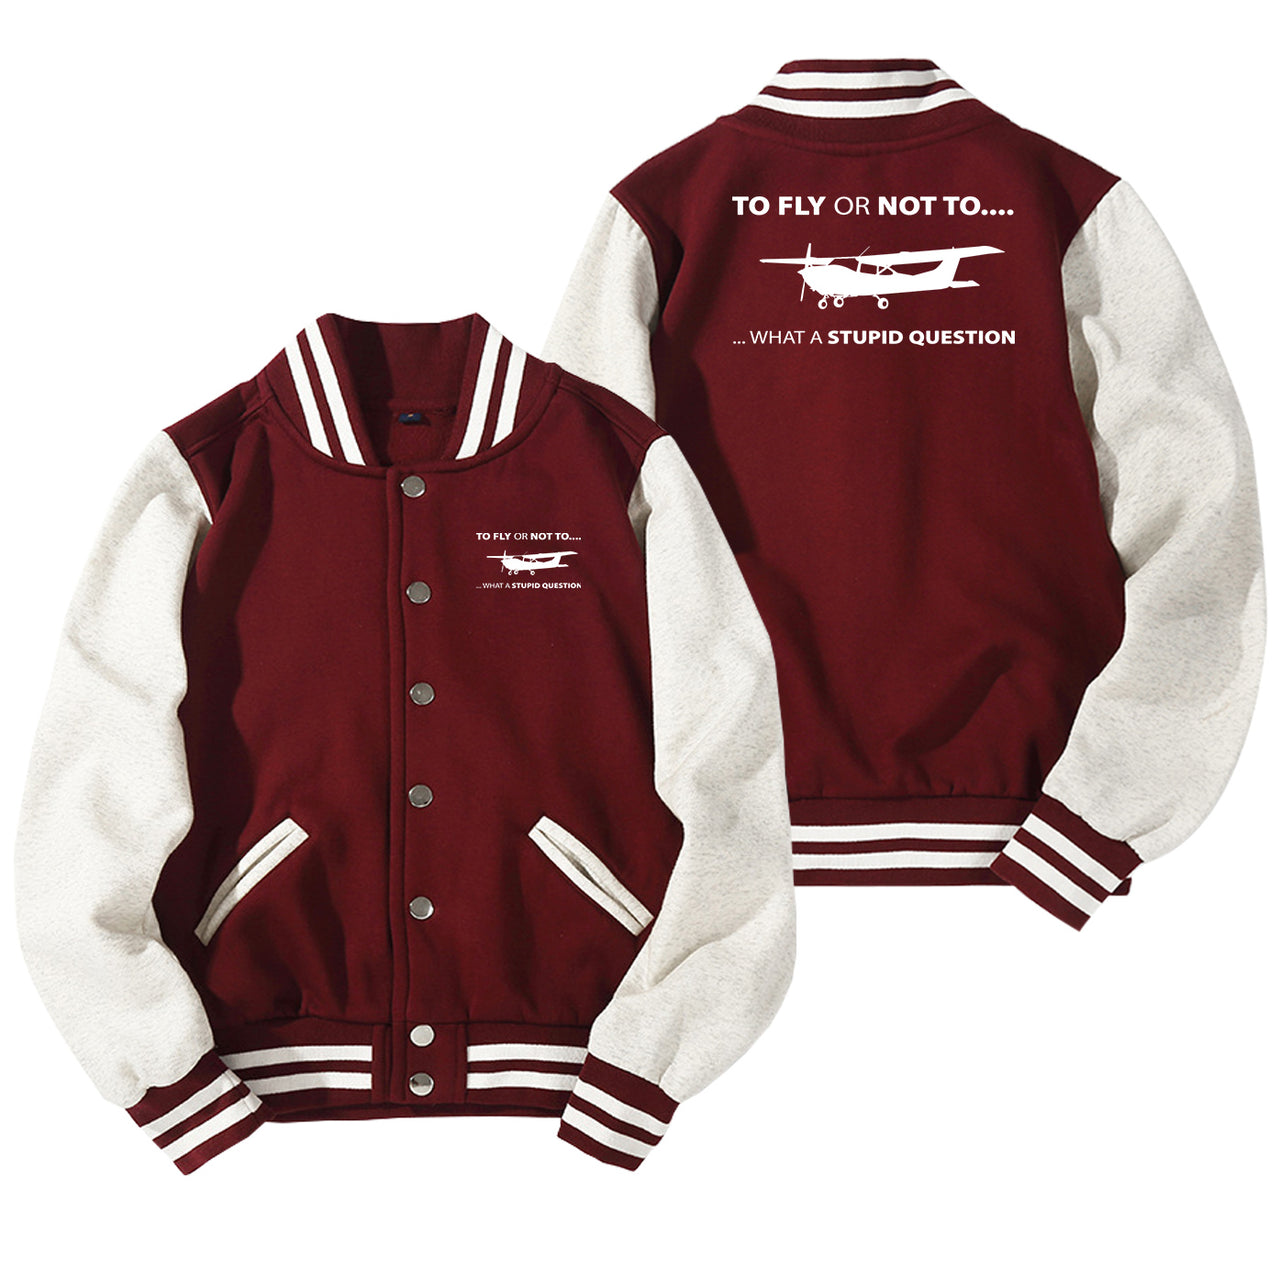 To Fly or Not To What a Stupid Question Designed Baseball Style Jackets